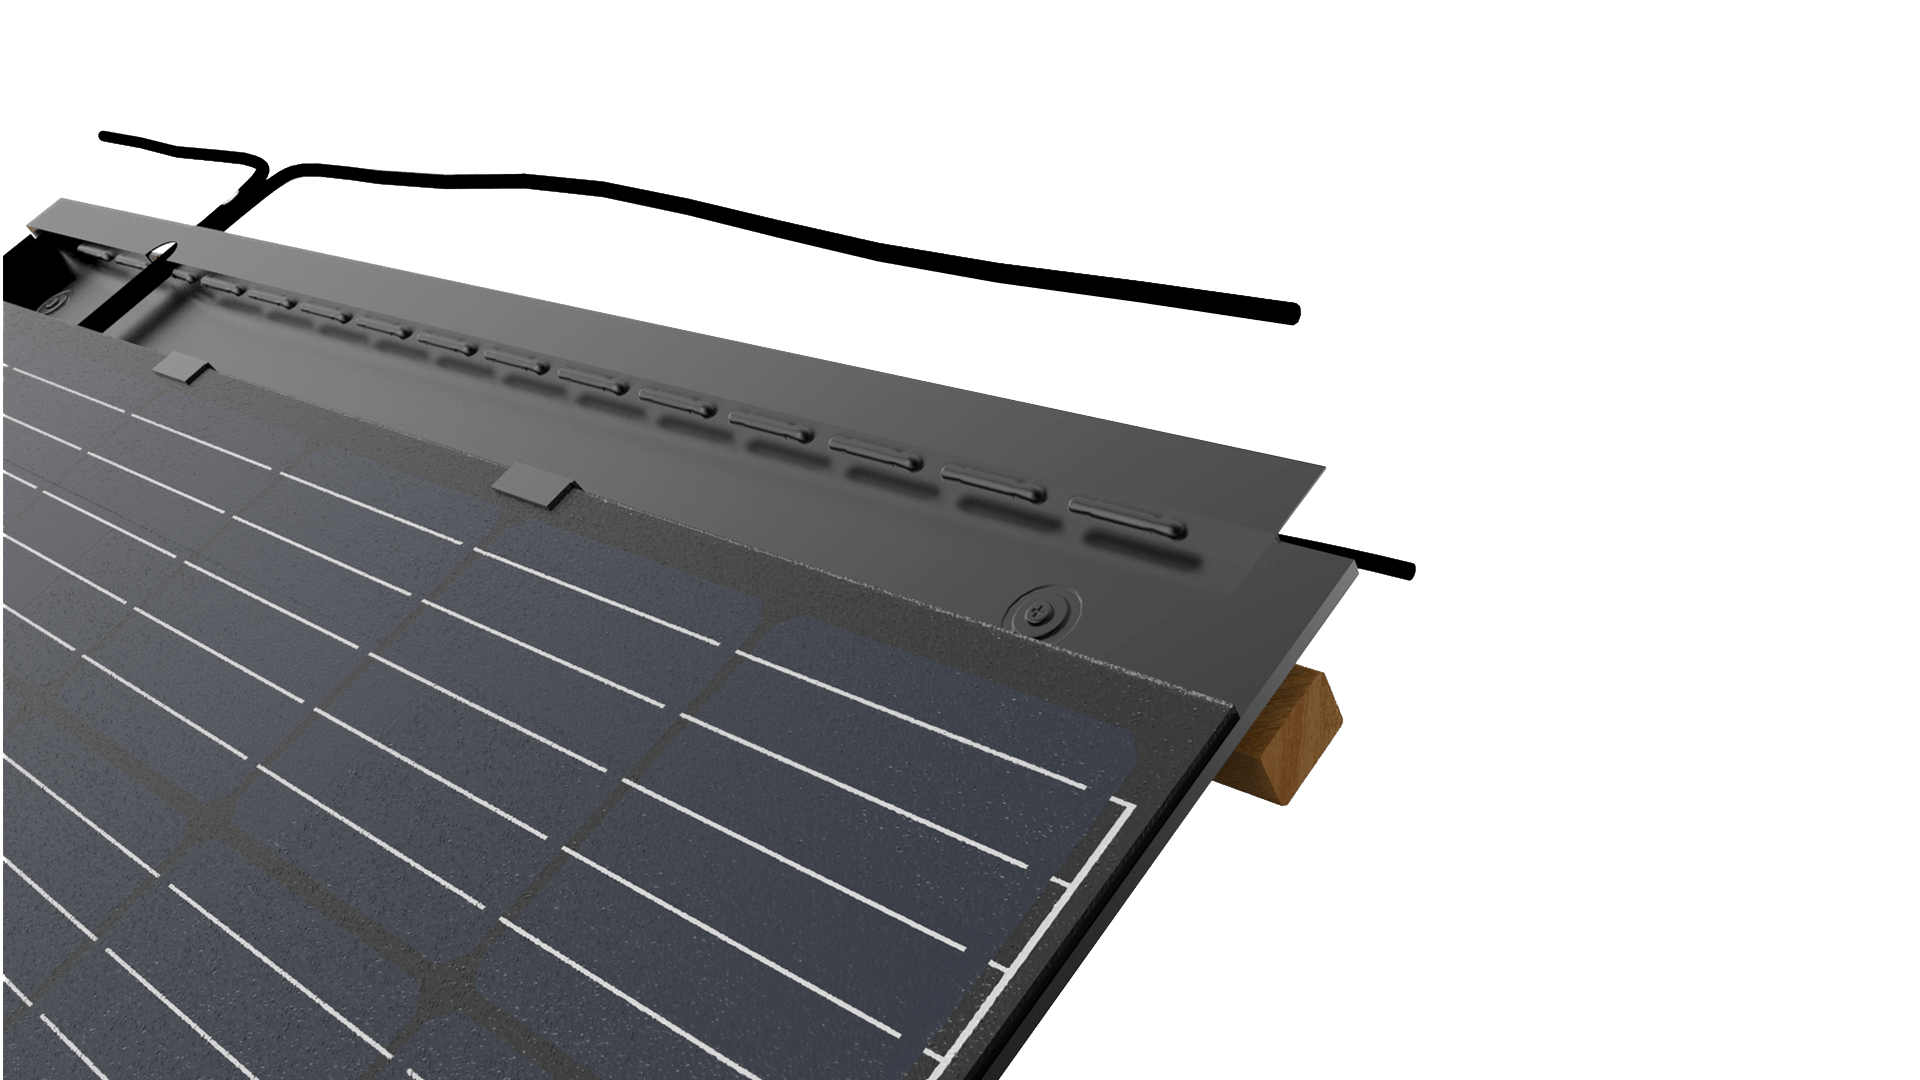 Perfect solution for those cases in which a roof replacement is required. Elegant and sleek design provides a futuristic look to your roof. No obstructions from solar panels will be visible on the roof. No external wiring that could be exposed to damage and cause potential hazards. No weak spots on the roof from roof penetrations as with conventional solar systems.